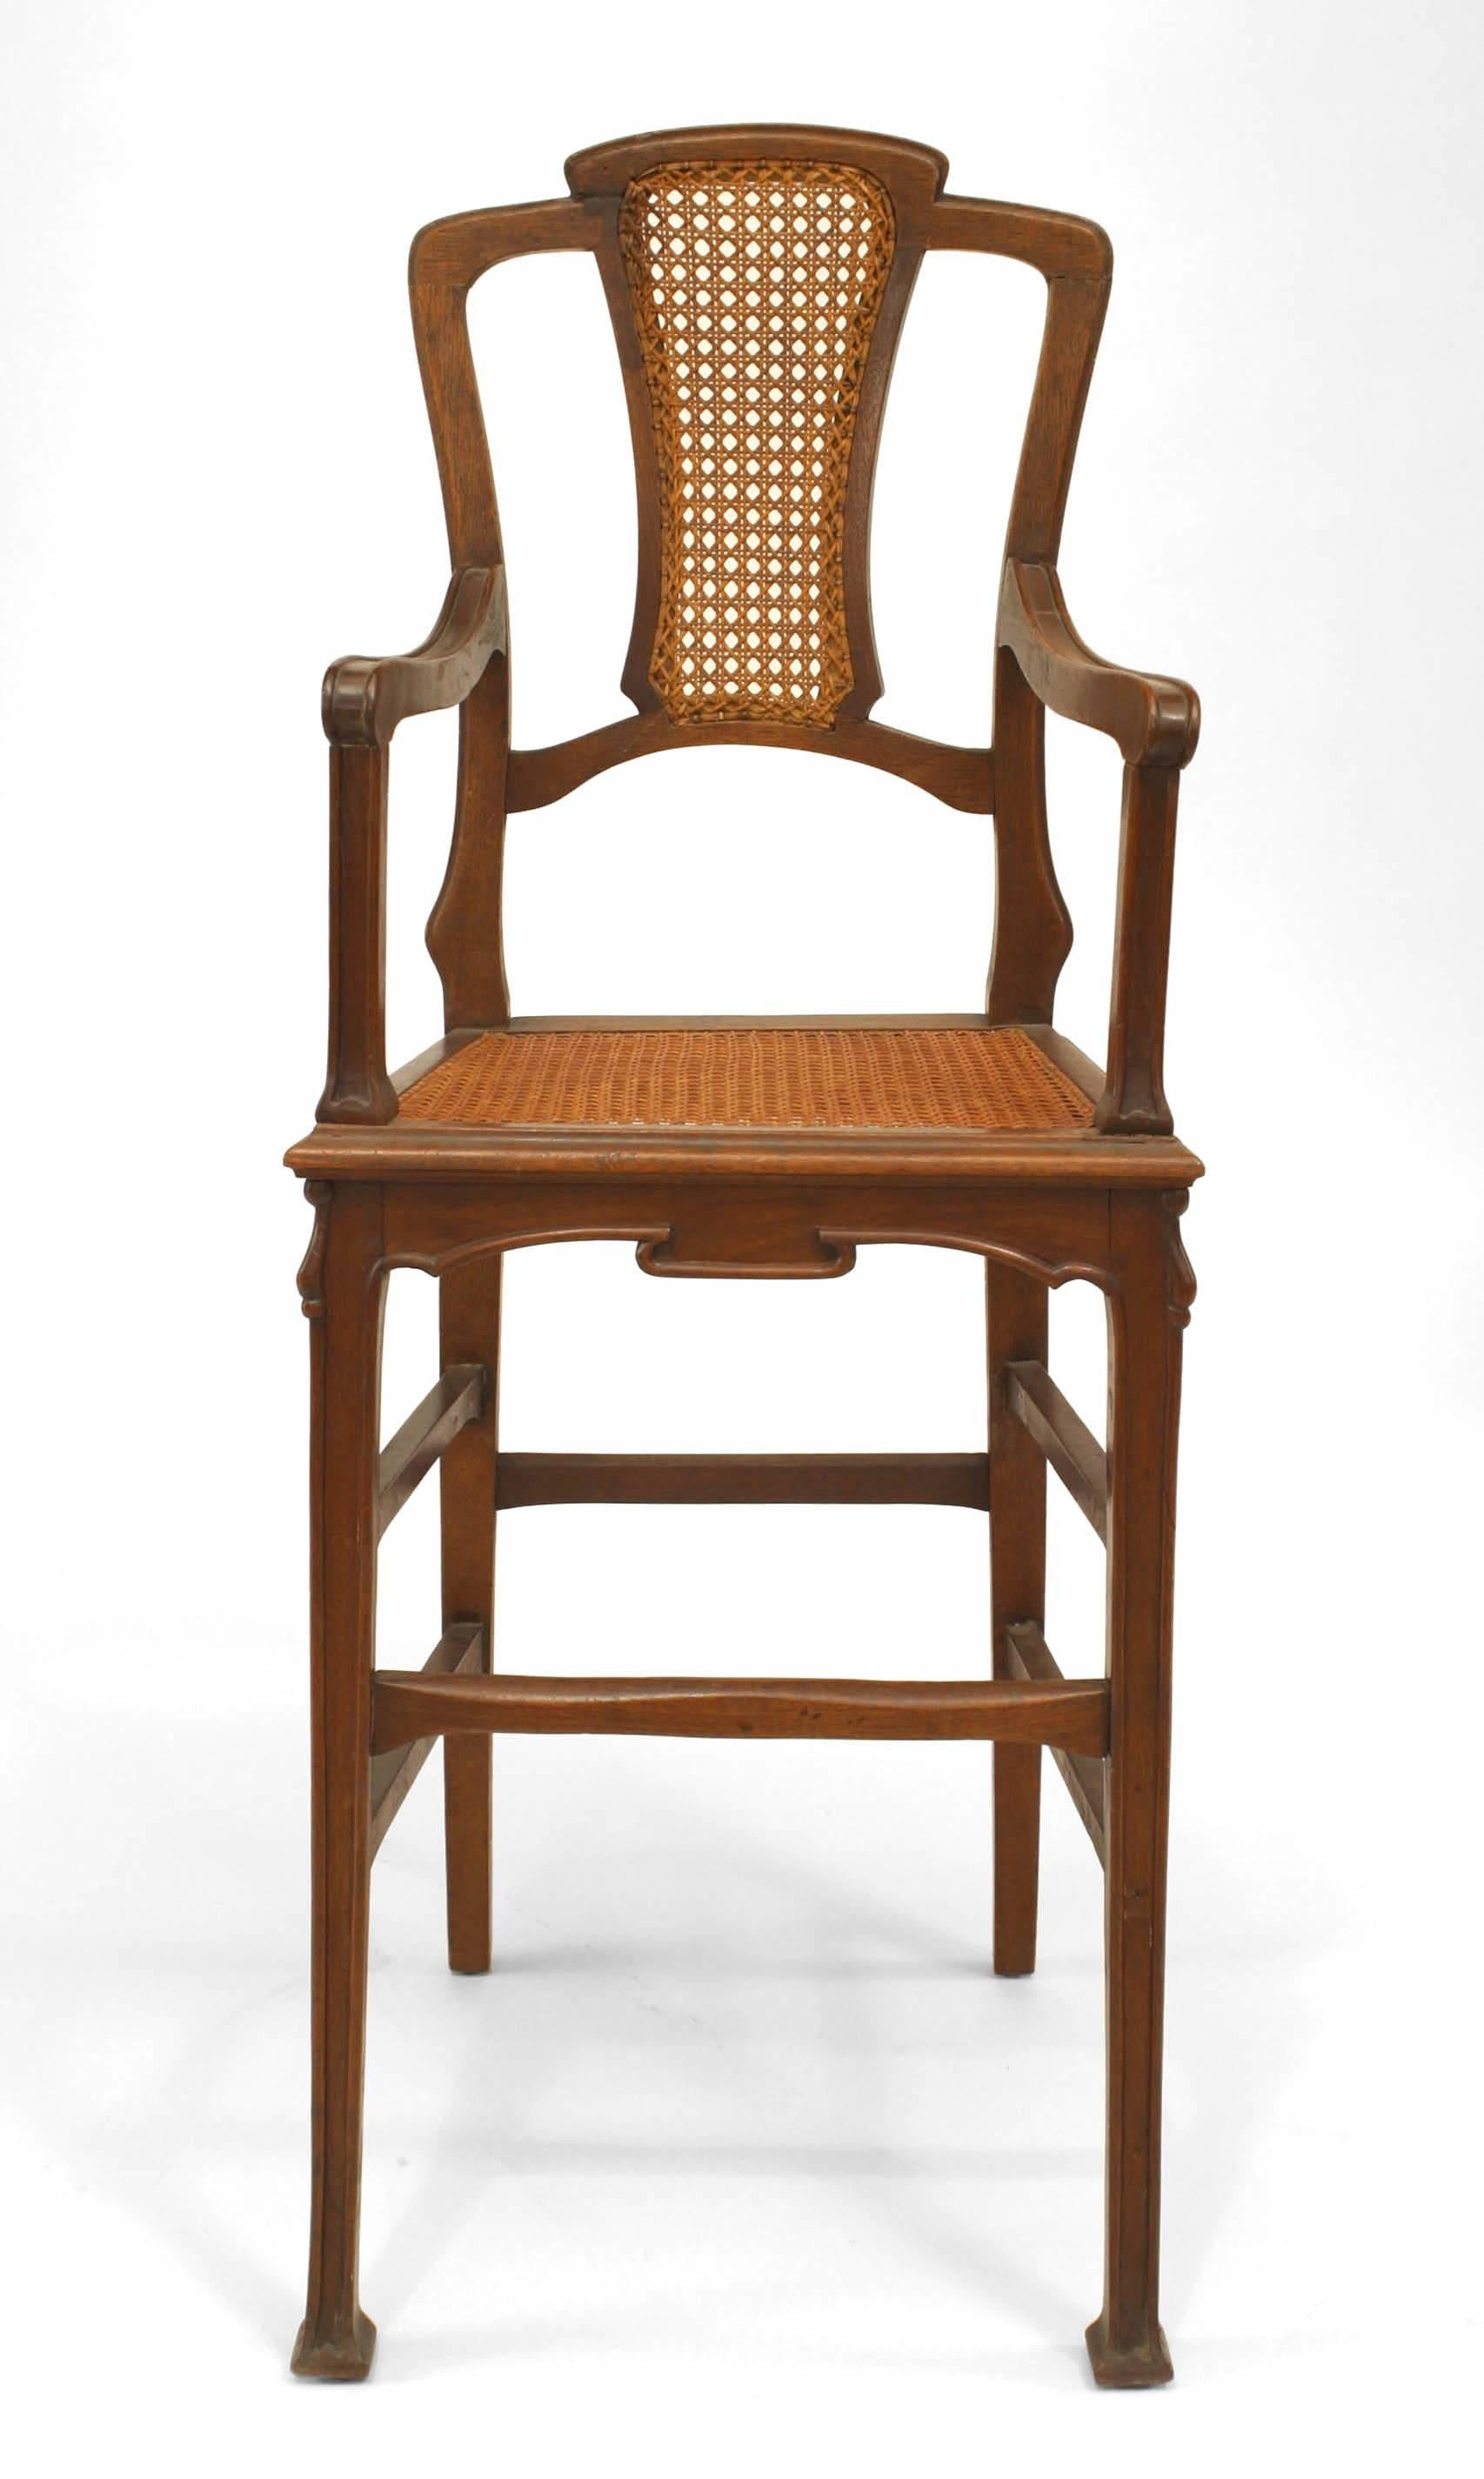 French Art Nouveau walnut childs high chair (signed)
